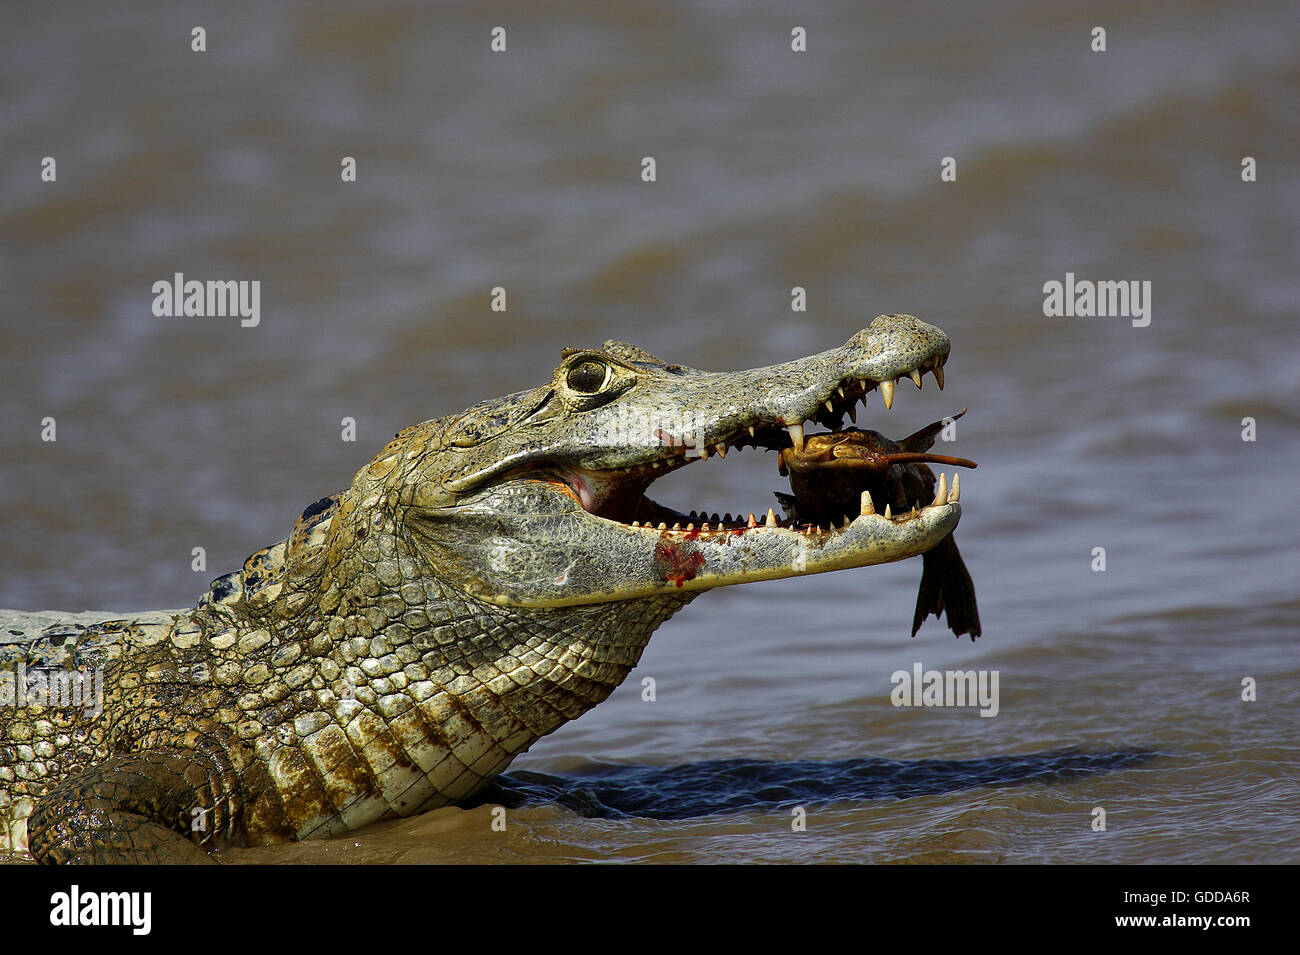 SPECTACLED CAIMAN caiman crocodilus, ADULT CATCHING FISH, LOS LIANOS IN VENEZUELA Stock Photo